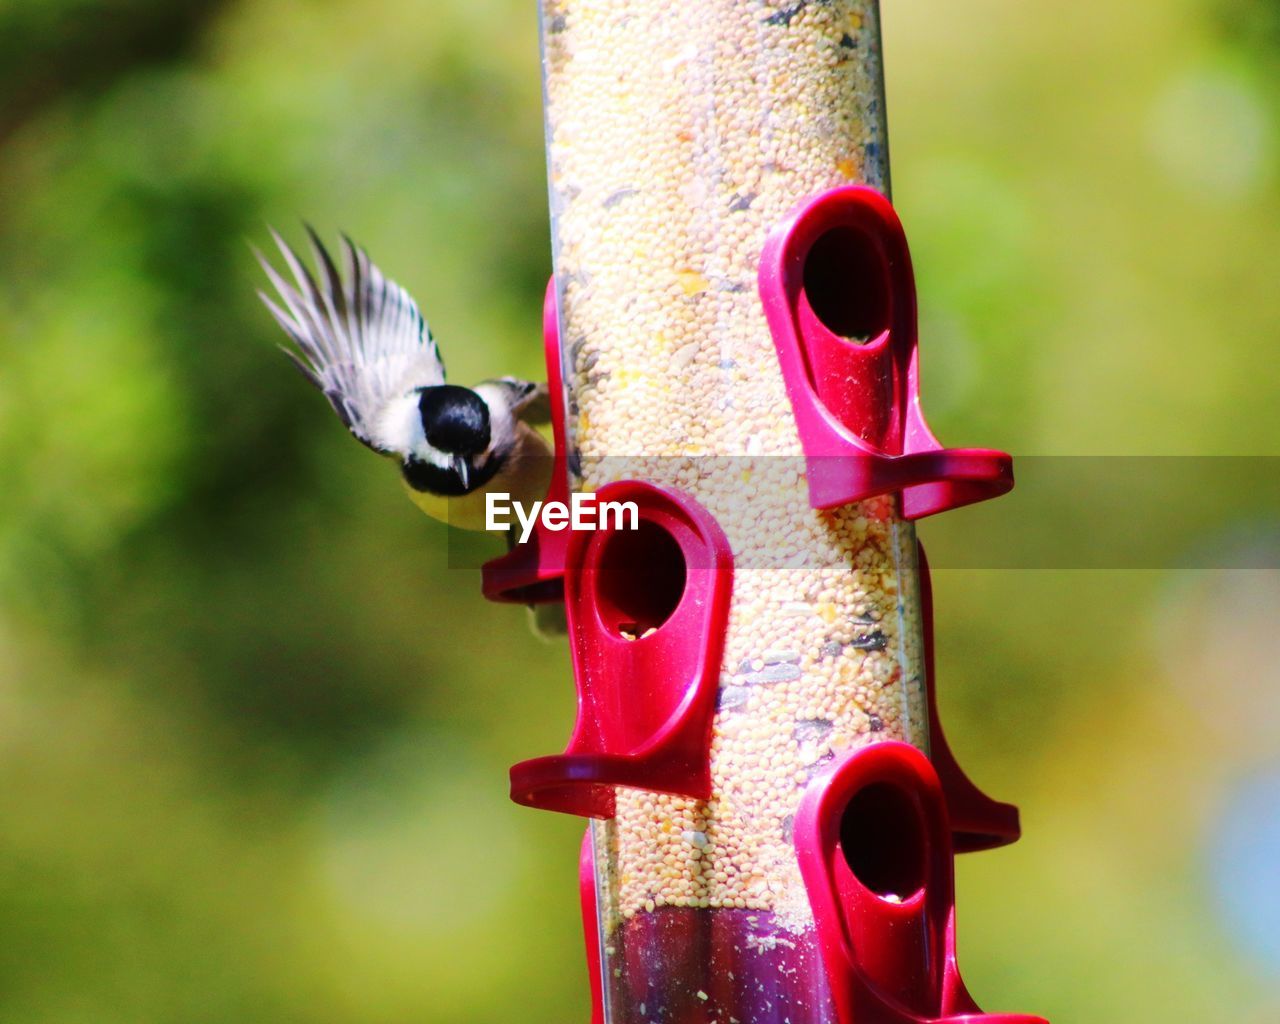 CLOSE-UP OF A BIRD FLYING OVER A FEEDER